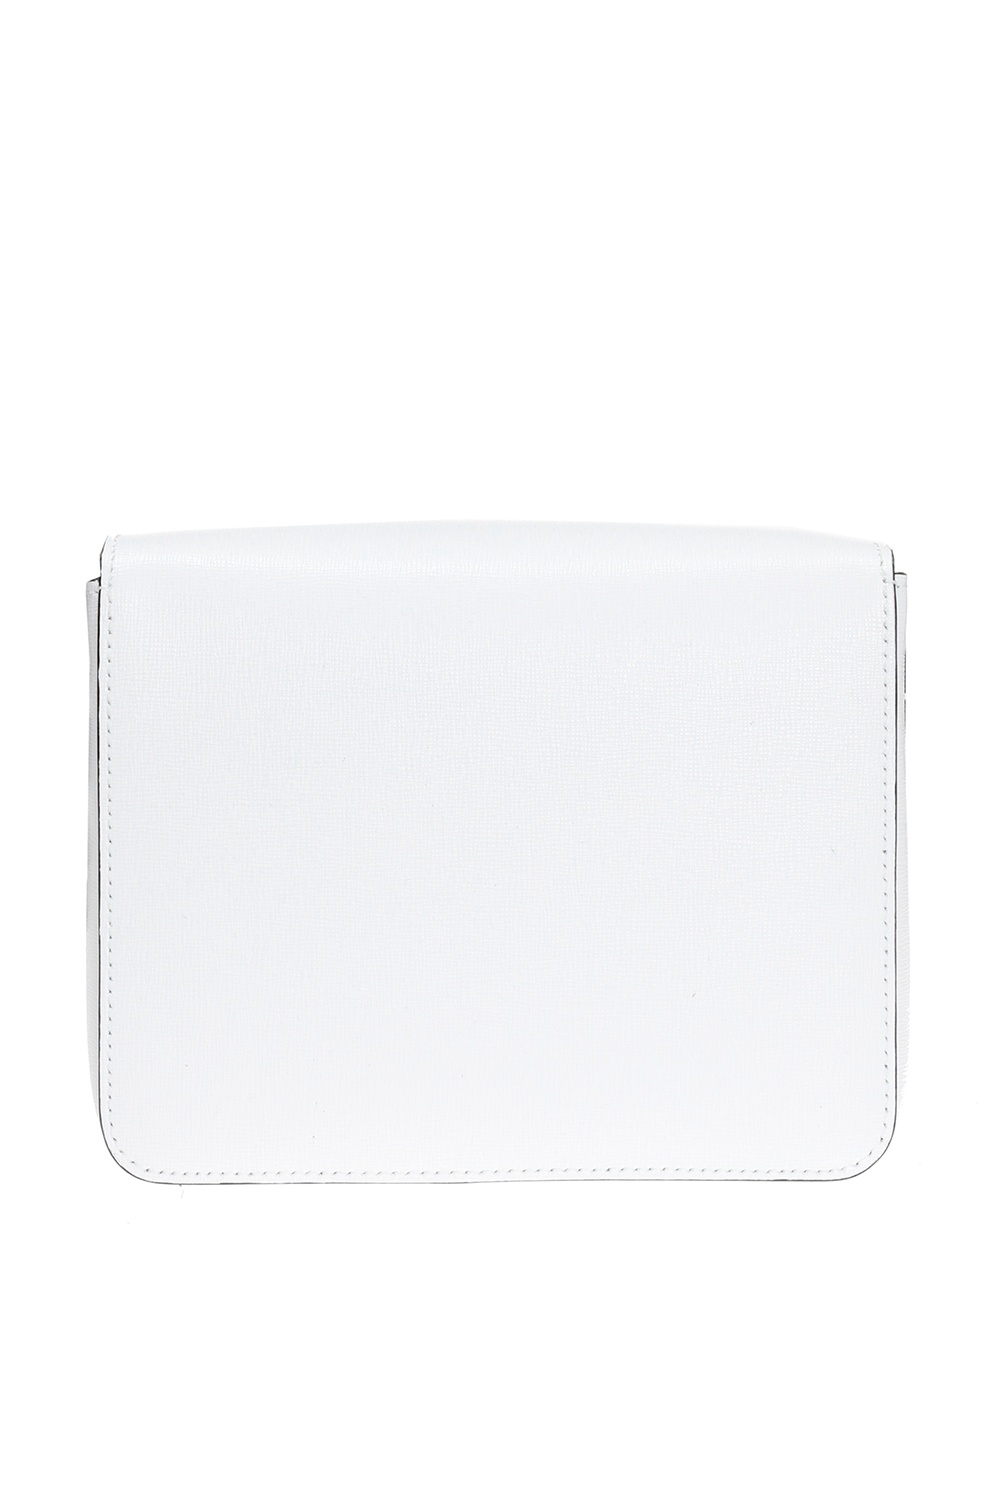 Sculpture leather crossbody bag Off-White Black in Leather - 25423163